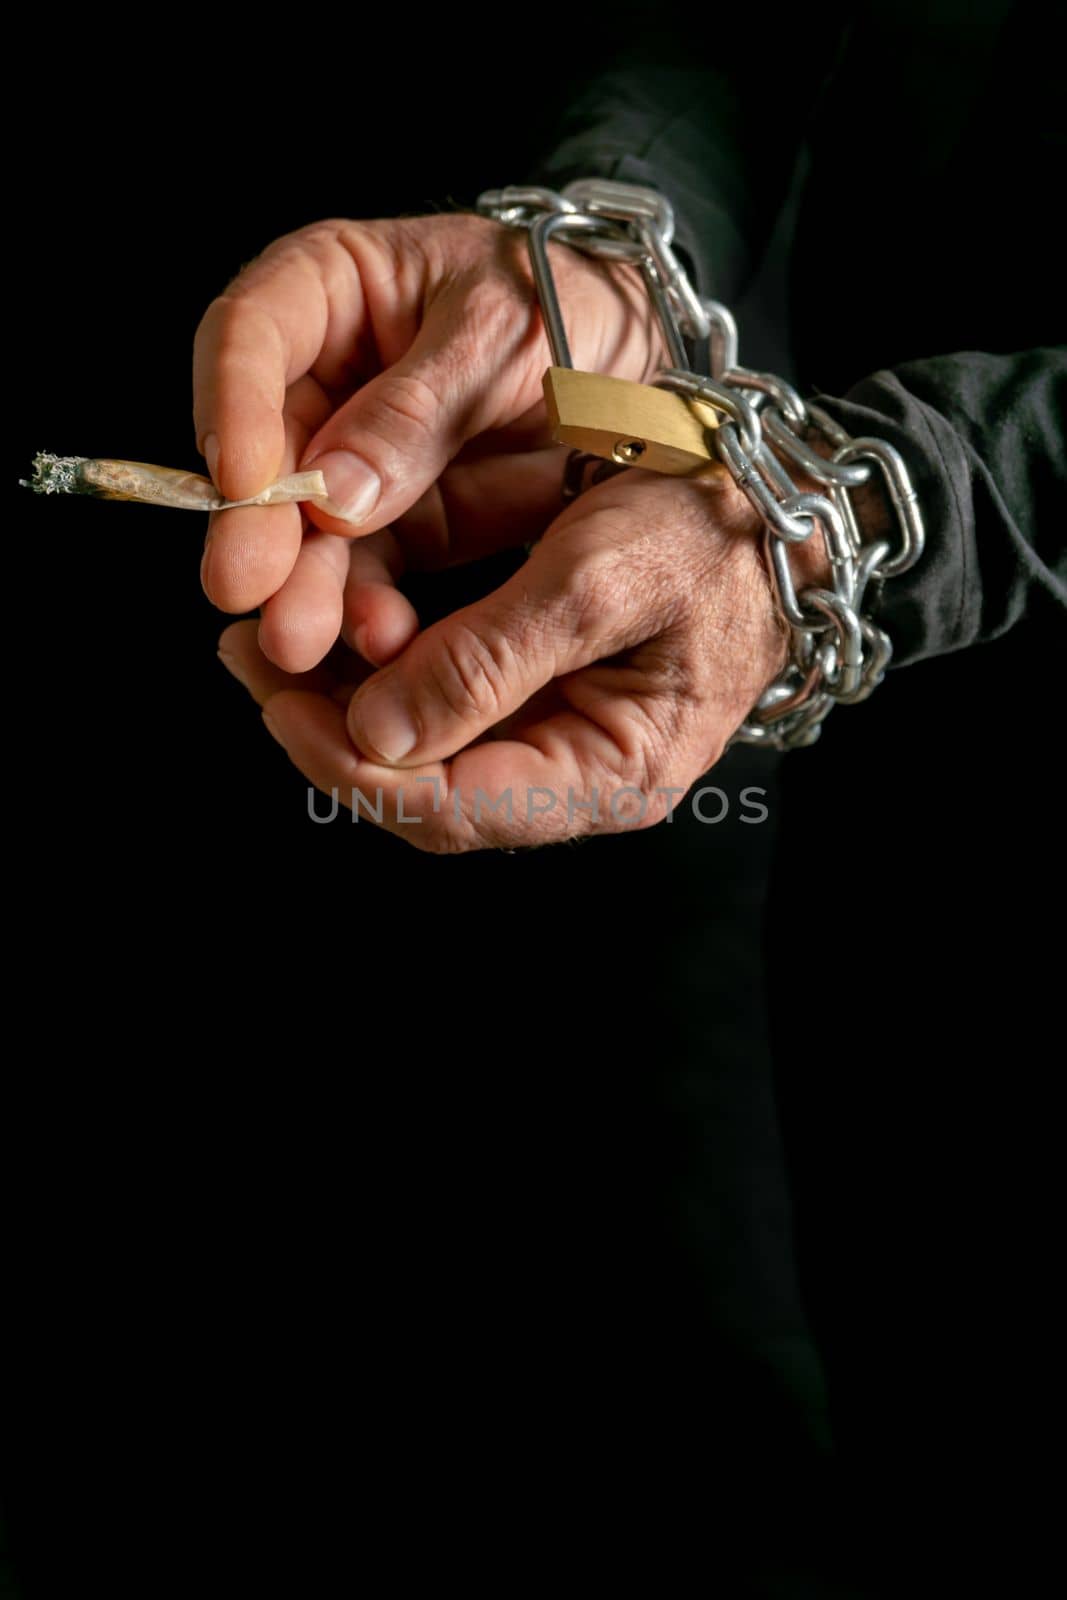 man smoking with chained hands on black background, concept of addiction